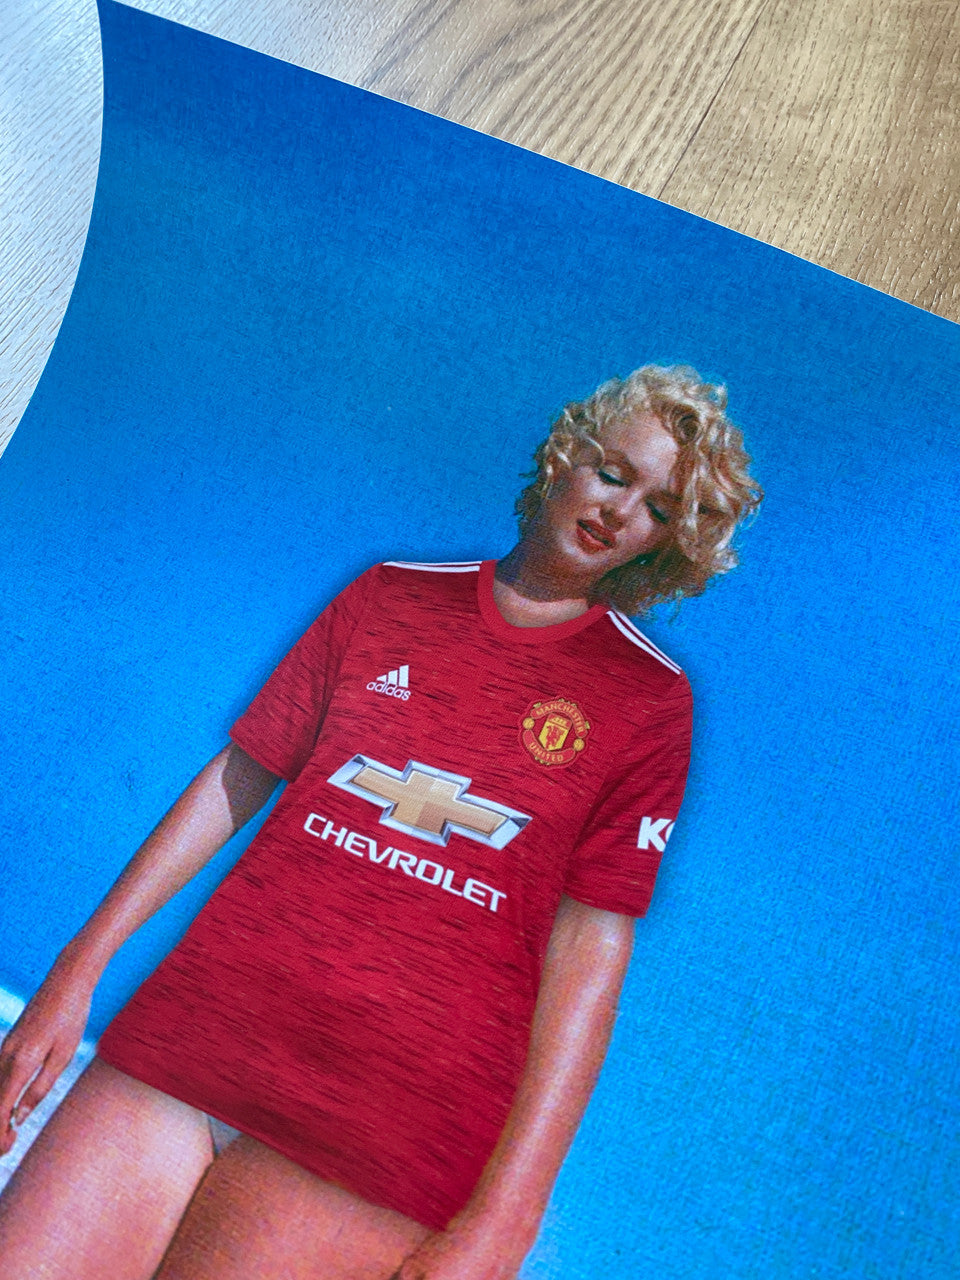 Custom Marilyn Monroe Football KiSS Canvas or Poster - Personalised, unique jersey - Pick any team - Football soccer - Gift Idea